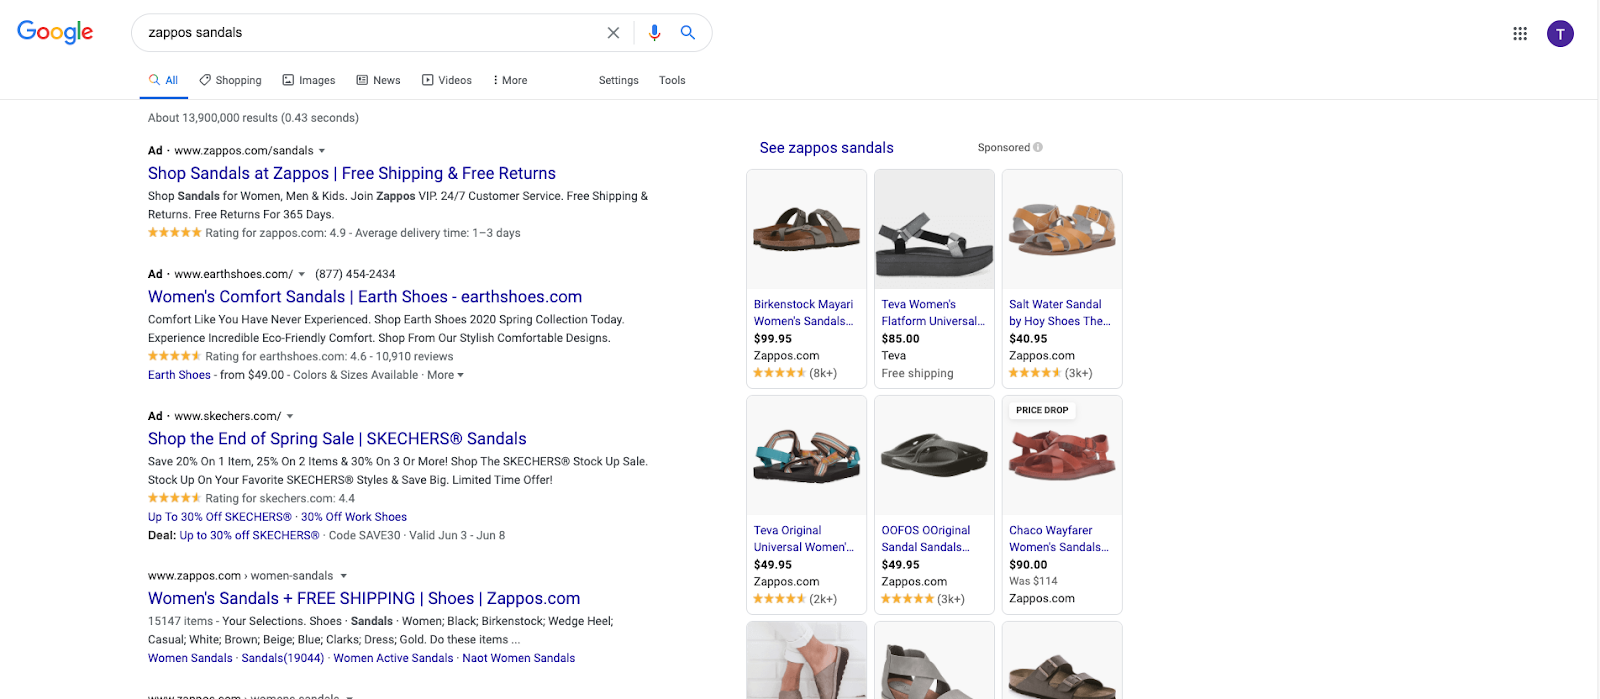 Google search results showing ads for Zappos sandals